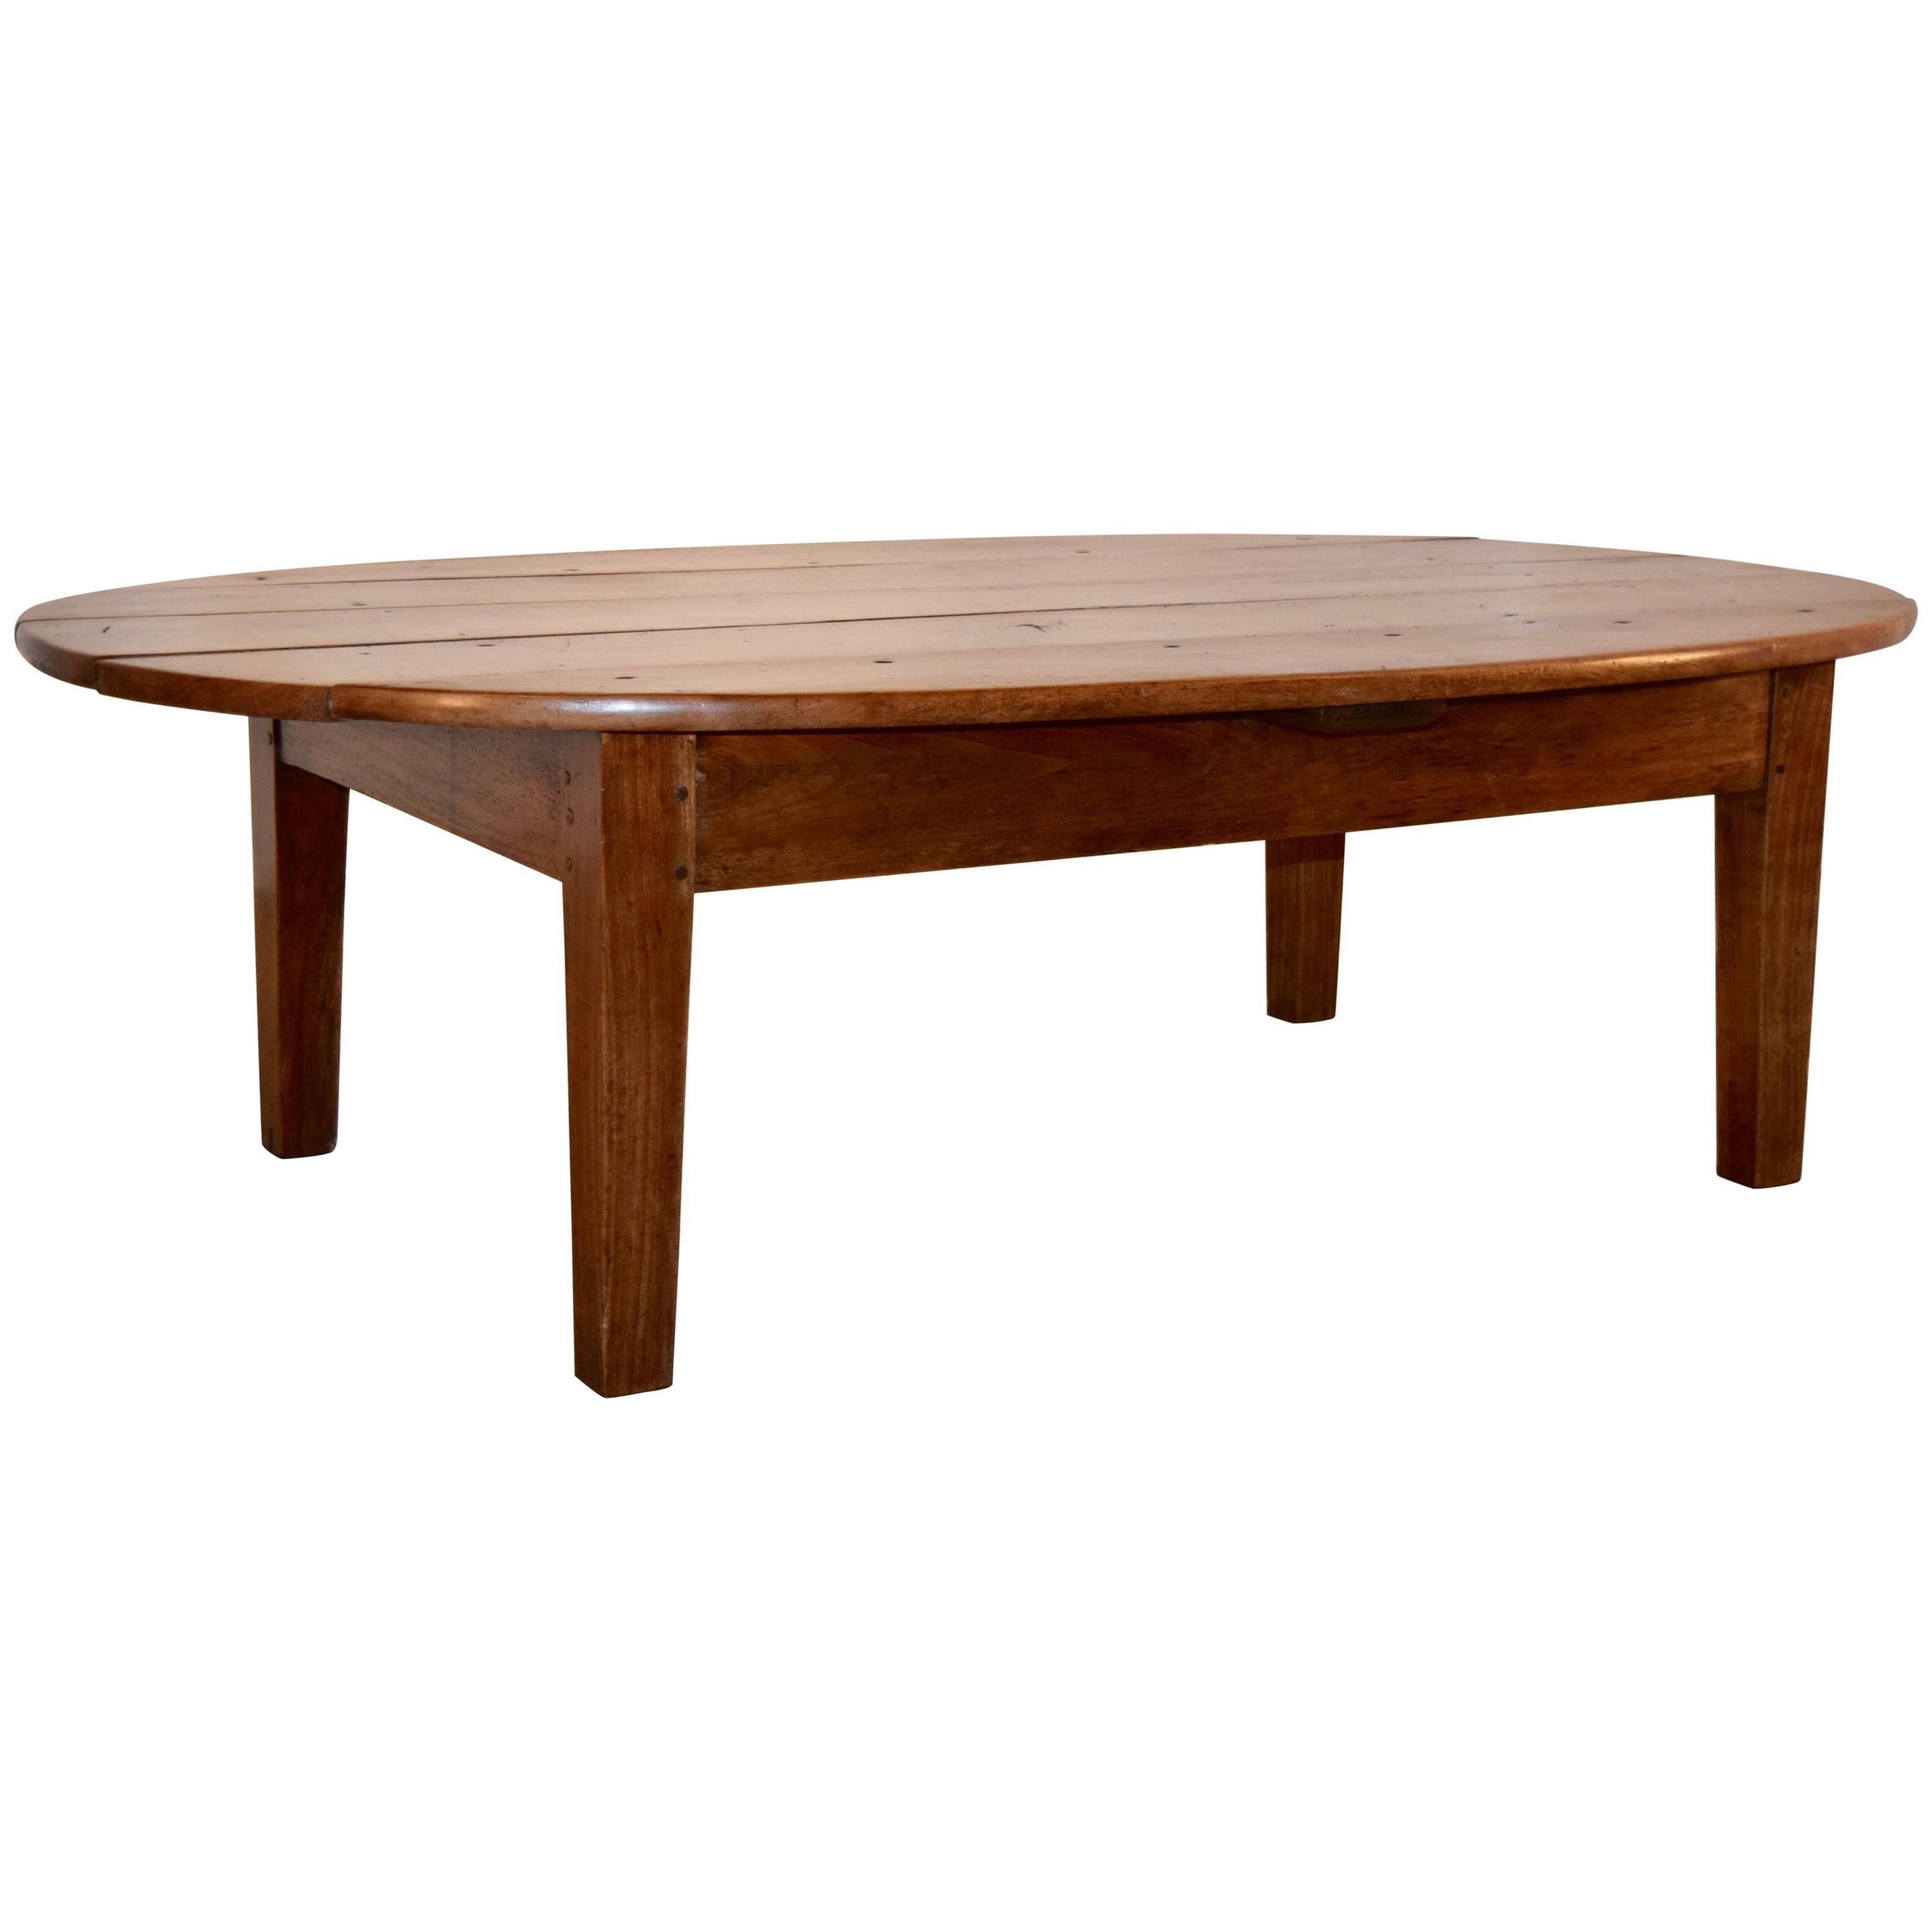 Early 19th Century Oval Coffee Table